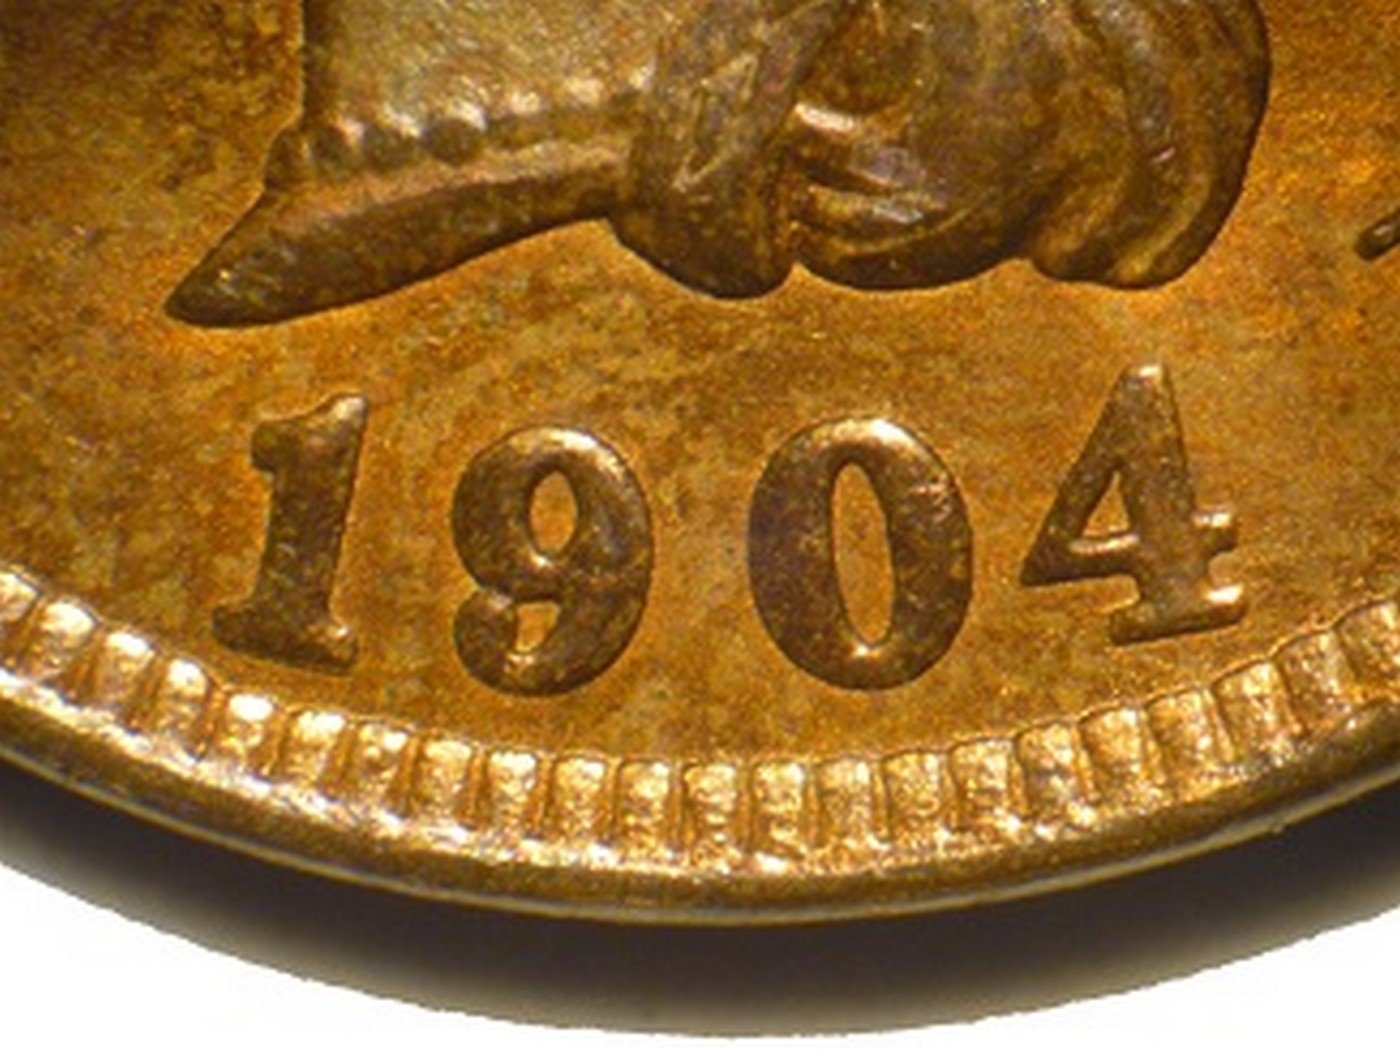 1904 RPD-011 - Indian Head Cent - Photo by David Poliquin